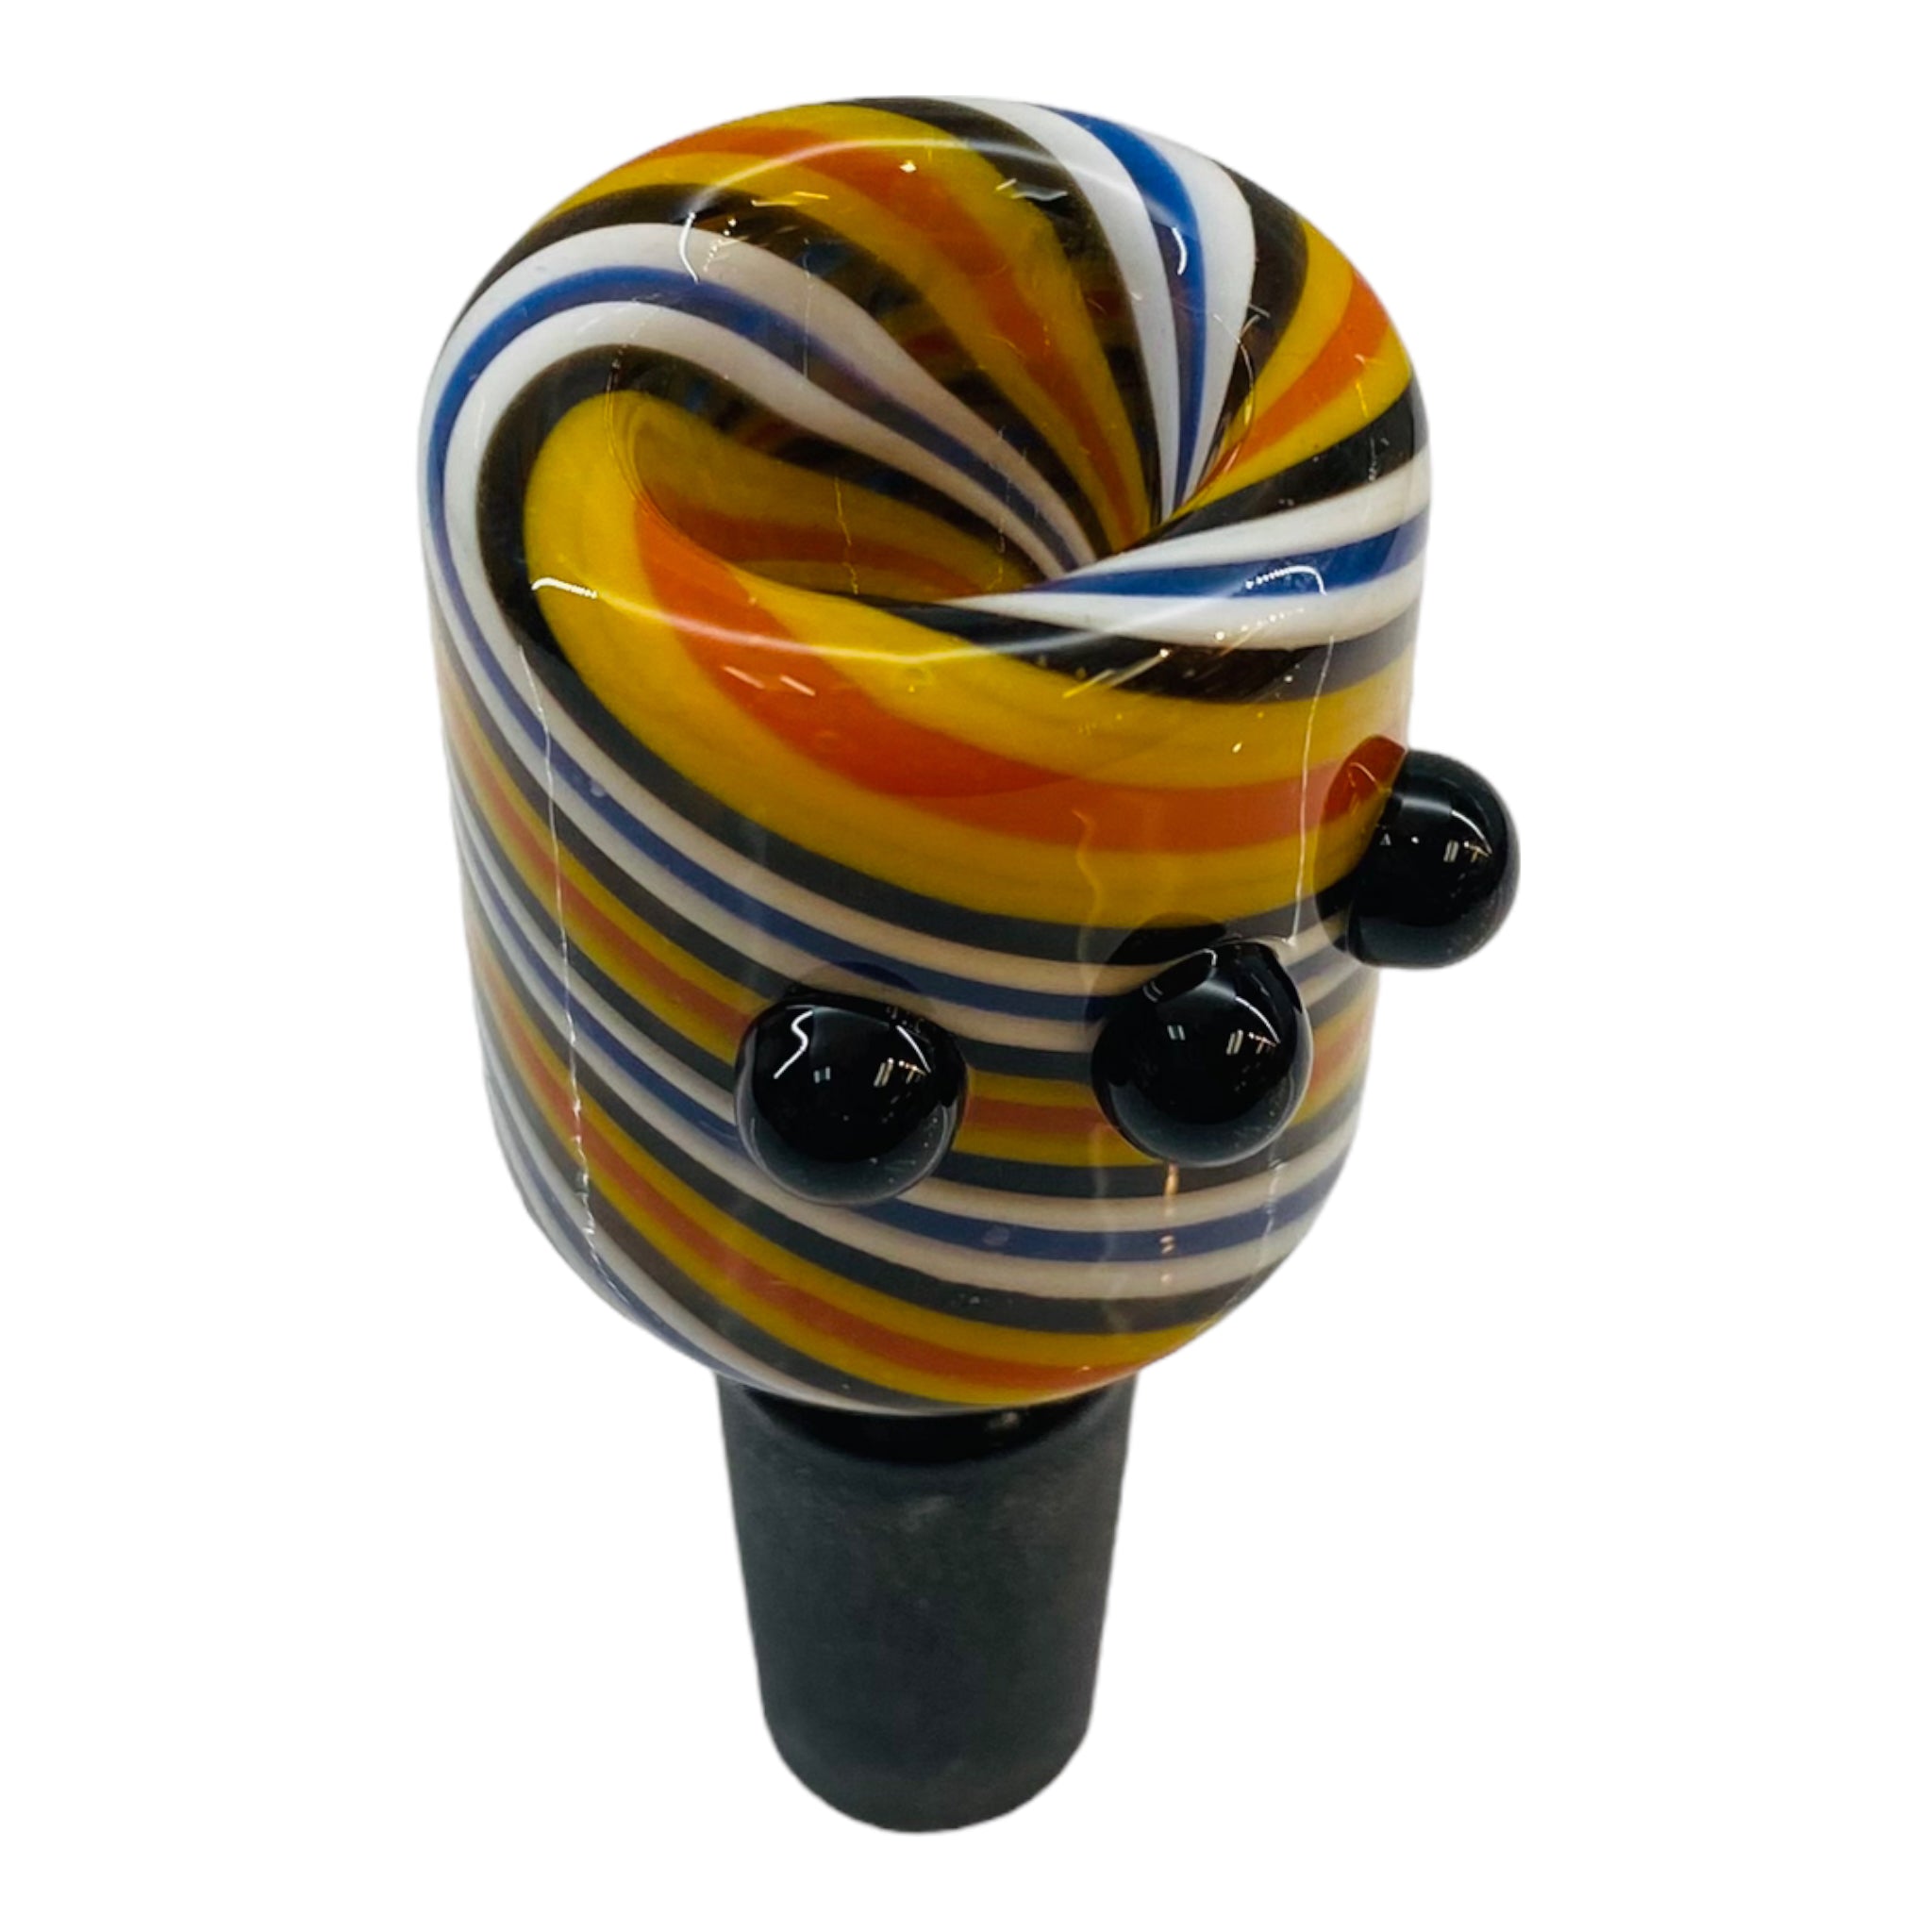 14mm Flower Bowl - Black Fitting With Tall Color Twist Bubble - Yellow, Orange, Black, And White